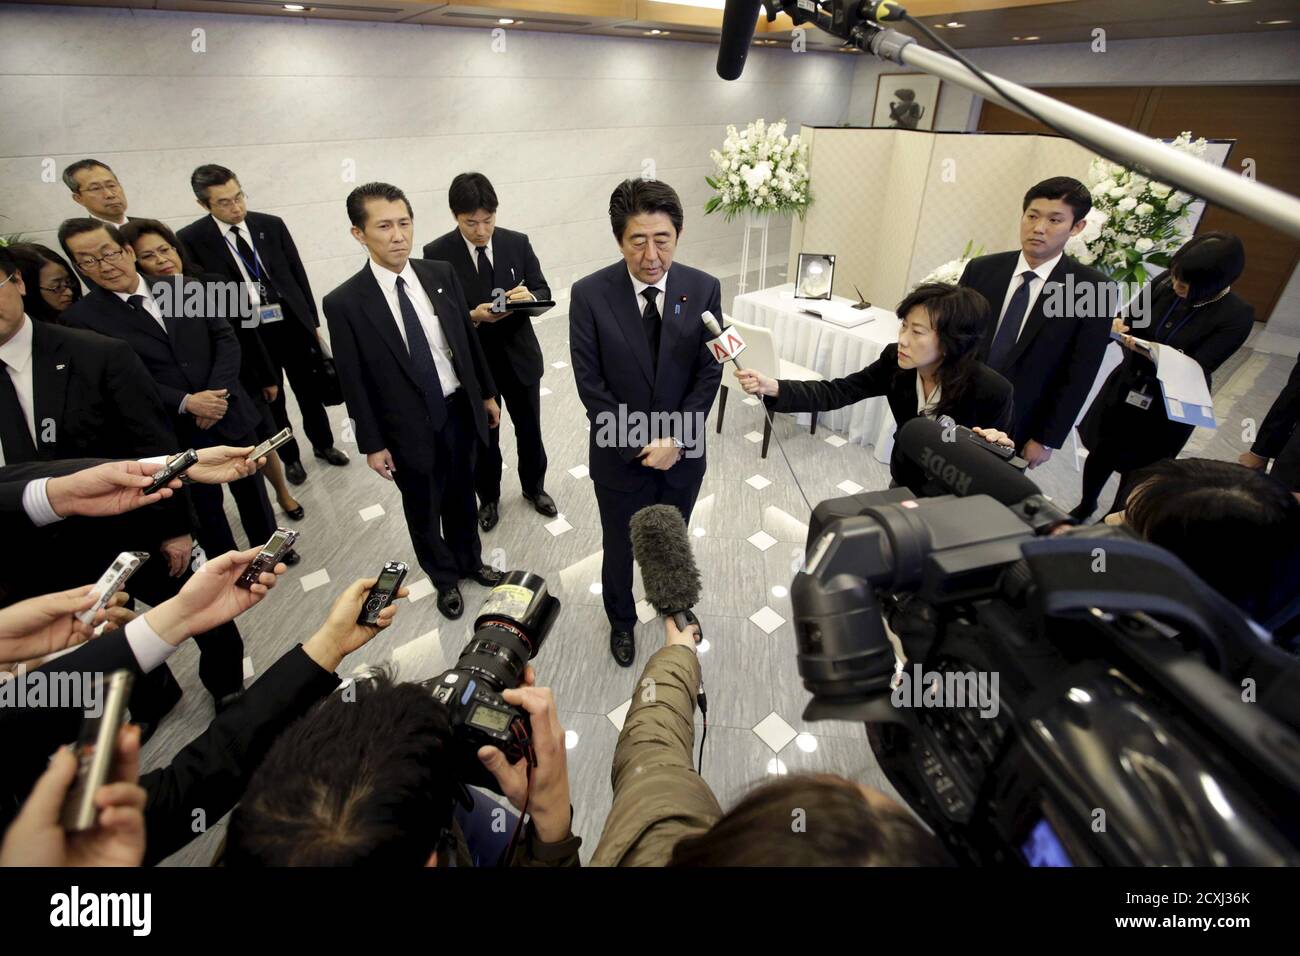 Japan's Prime Minister Shinzo Abe speaks to the media after signing a condolences book for the late Lee Kuan Yew, former Prime Minister of Singapore, at the Singapore Embassy in Tokyo March 24, 2015. Lee, Singapore's first prime minister and architect of the tiny Southeast Asian city-state's rapid rise from British tropical outpost to global trade and financial centre, died early on Monday, aged 91, the Prime Minister's Office said. REUTERS/Eugene Hoshiko/Pool Stock Photo